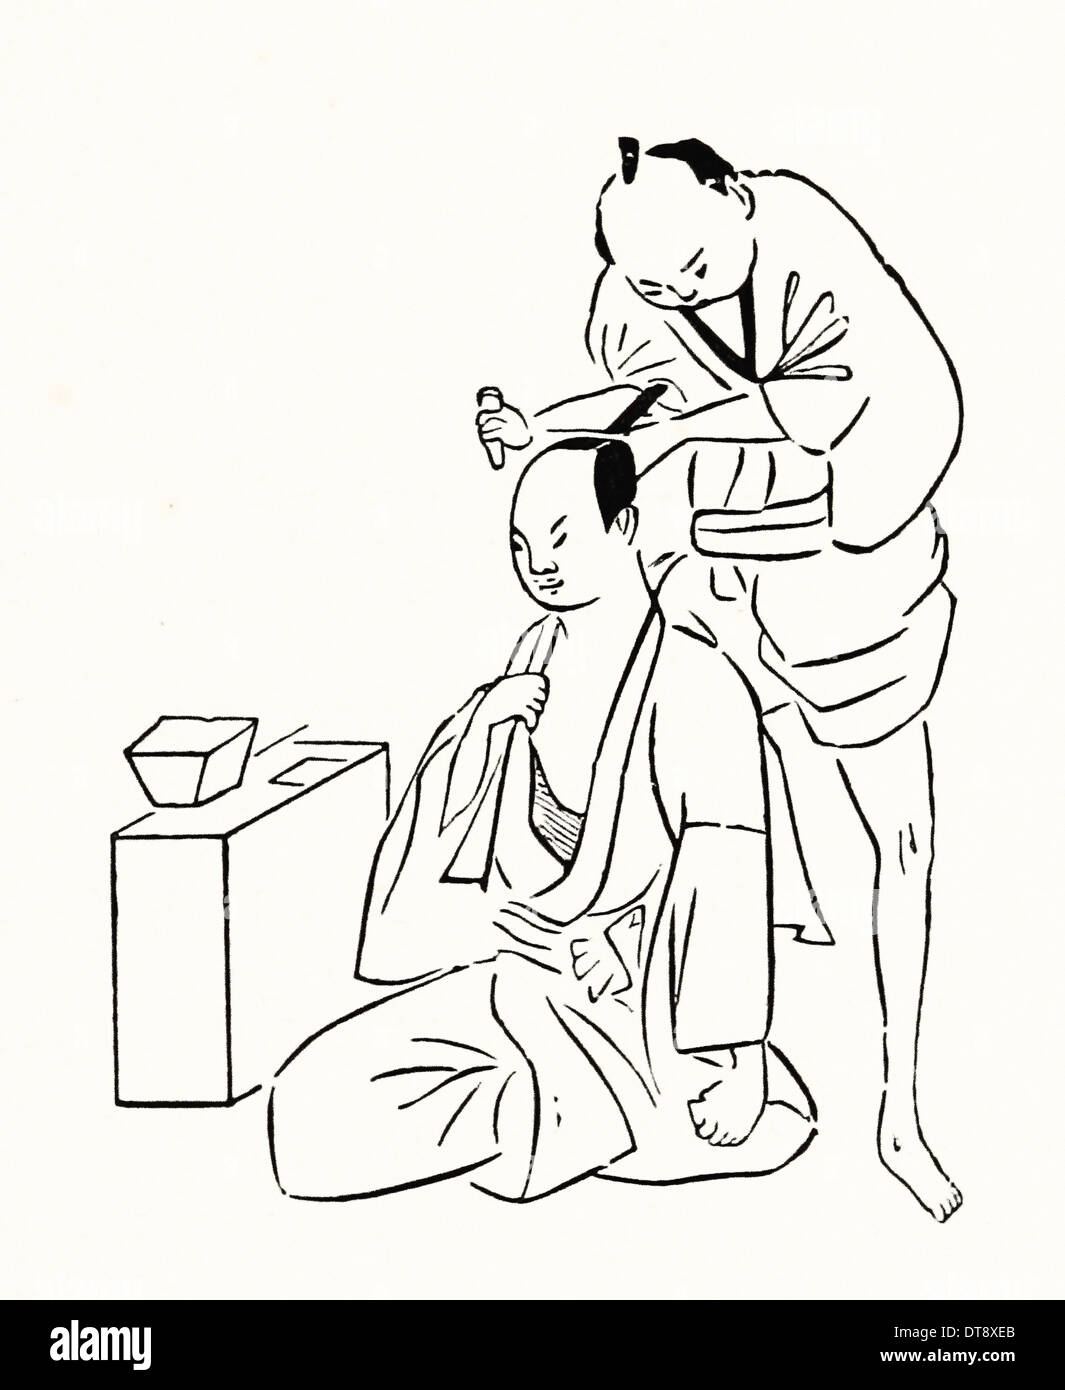 Man capping another man - Japanese drawing XIX th century Stock Photo